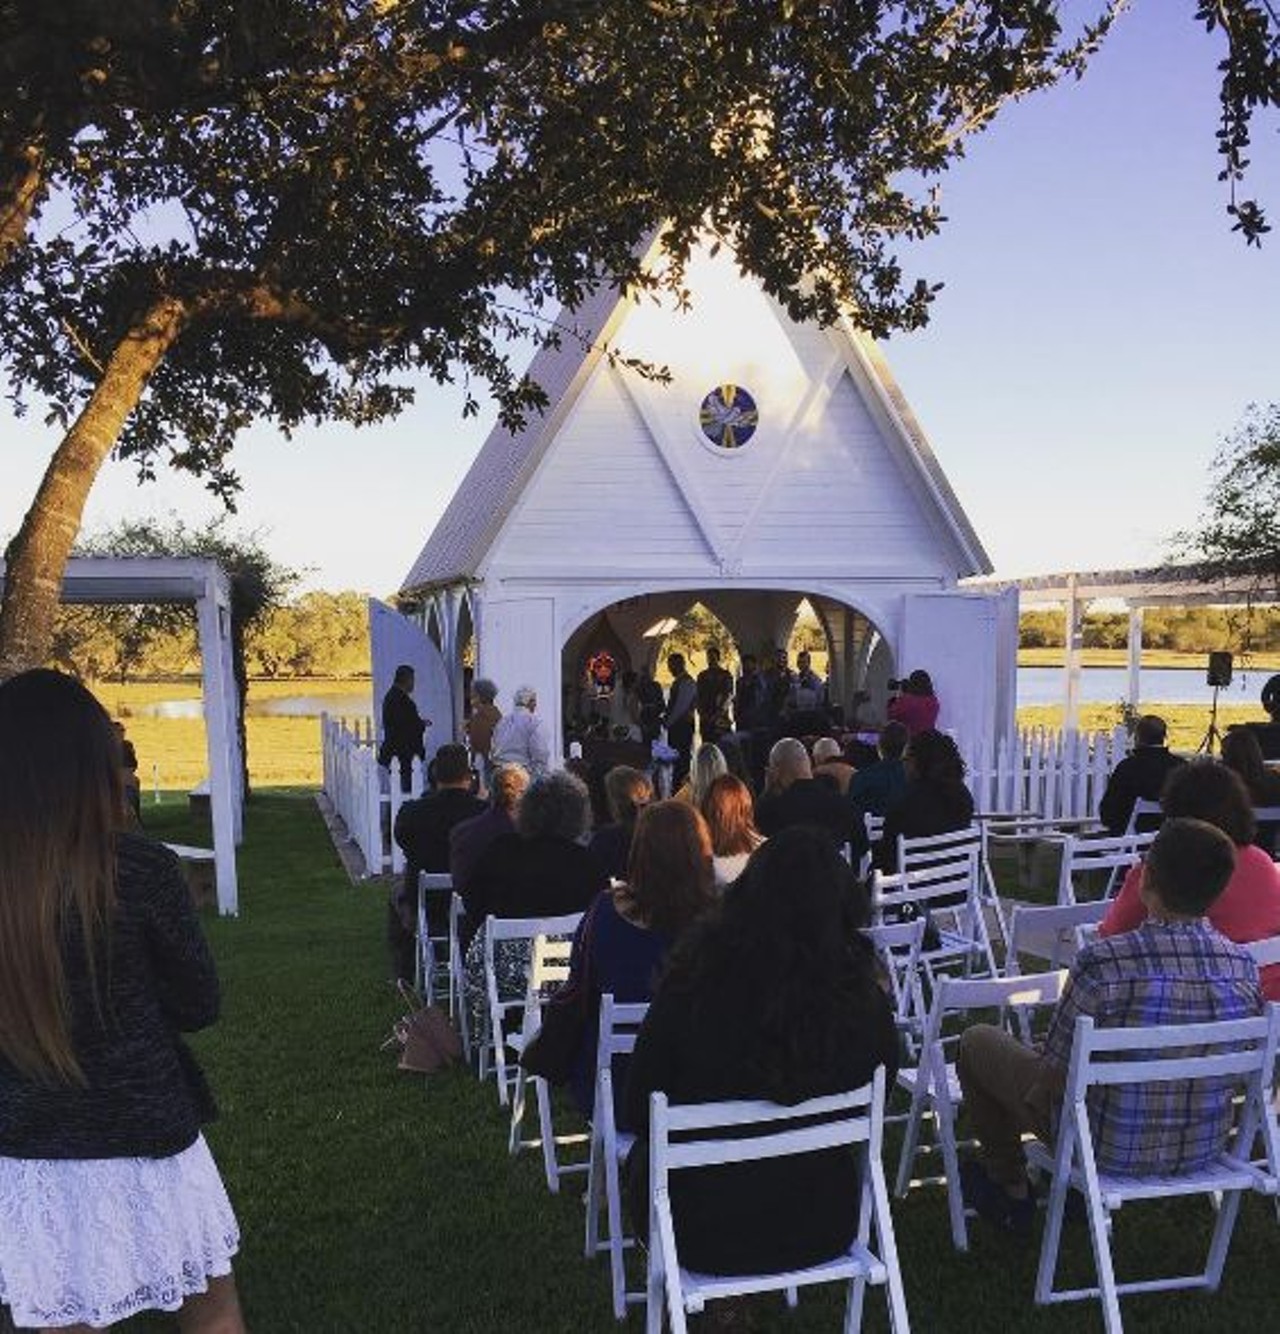 Knolle Farm & Ranch Bed, Barn, & Breakfast
Take your boo down to this little white chapel. The wide front door lets all of your guests see every part of the ceremony.
13016 FM 70, Sandia, knolle.com
Photo via Instagram, jackbishop